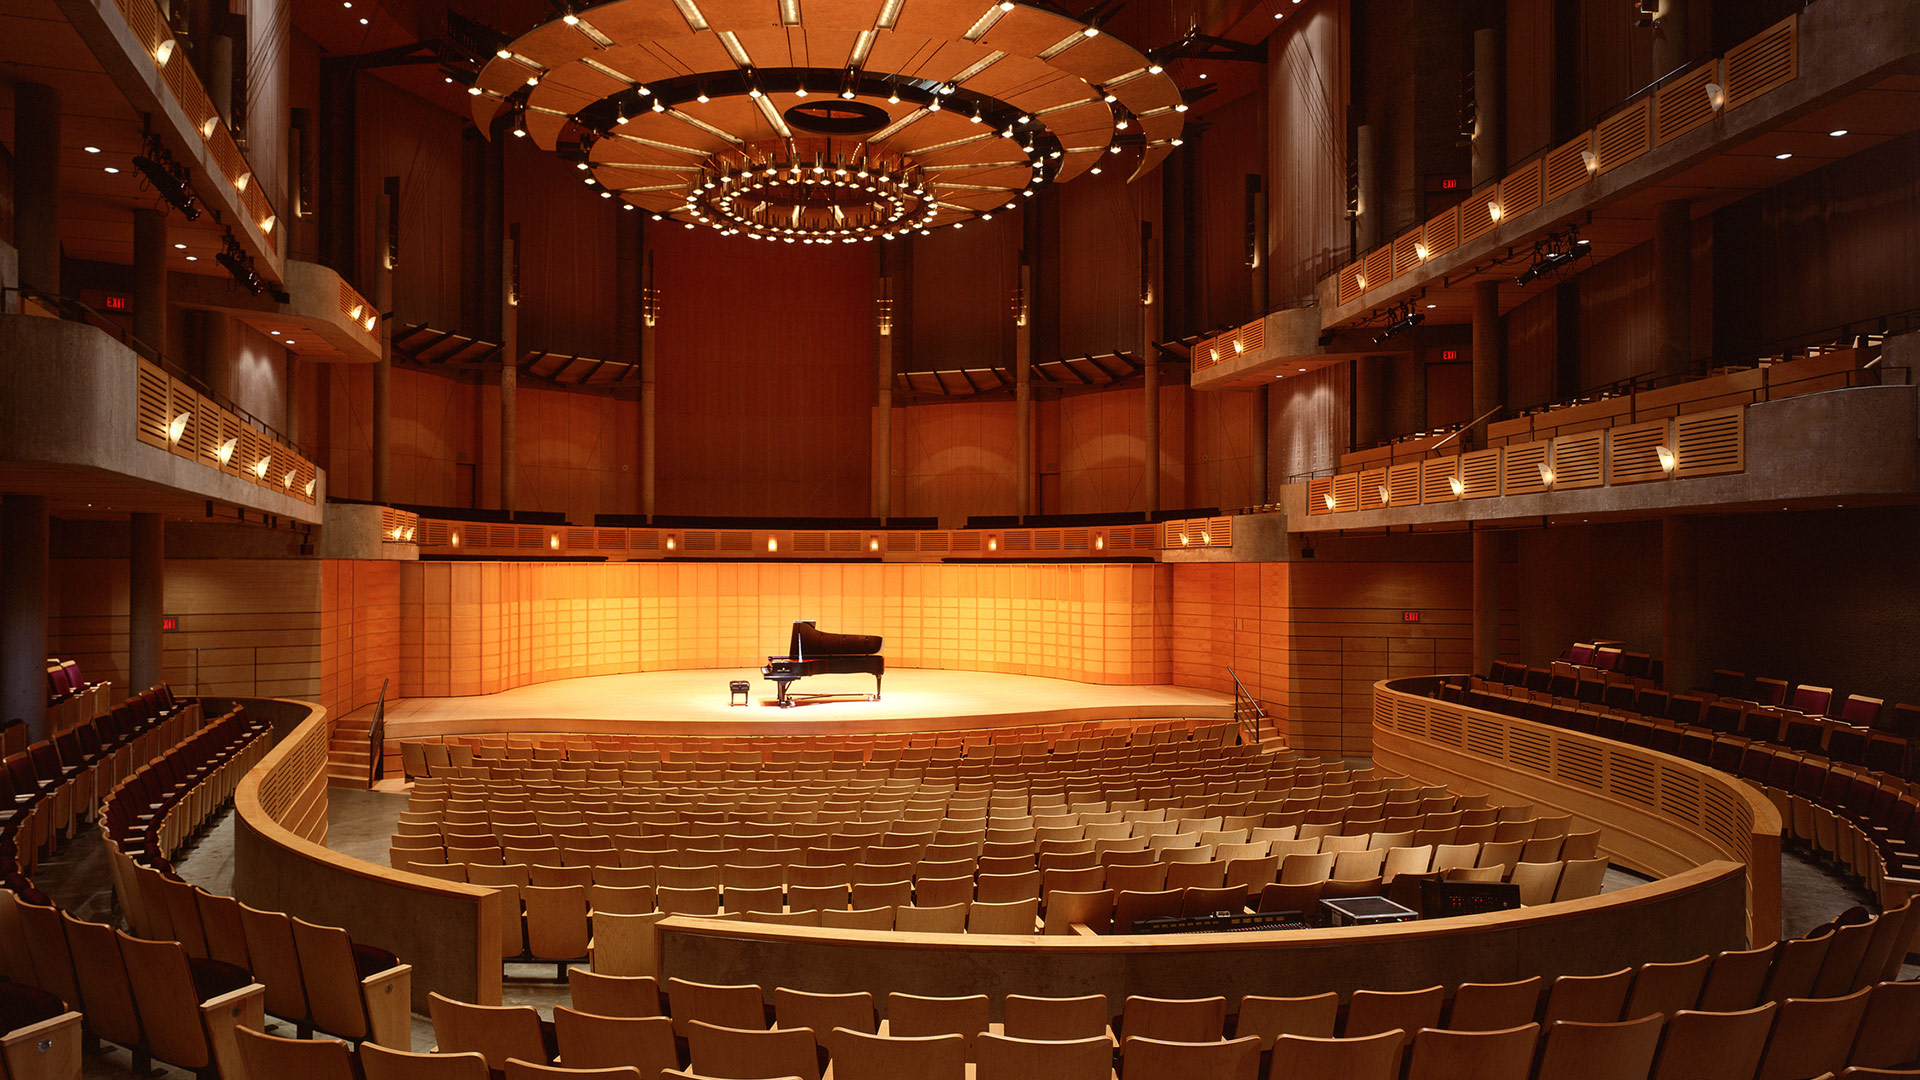 University of British Columbia, Chan Centre for the Performing Arts